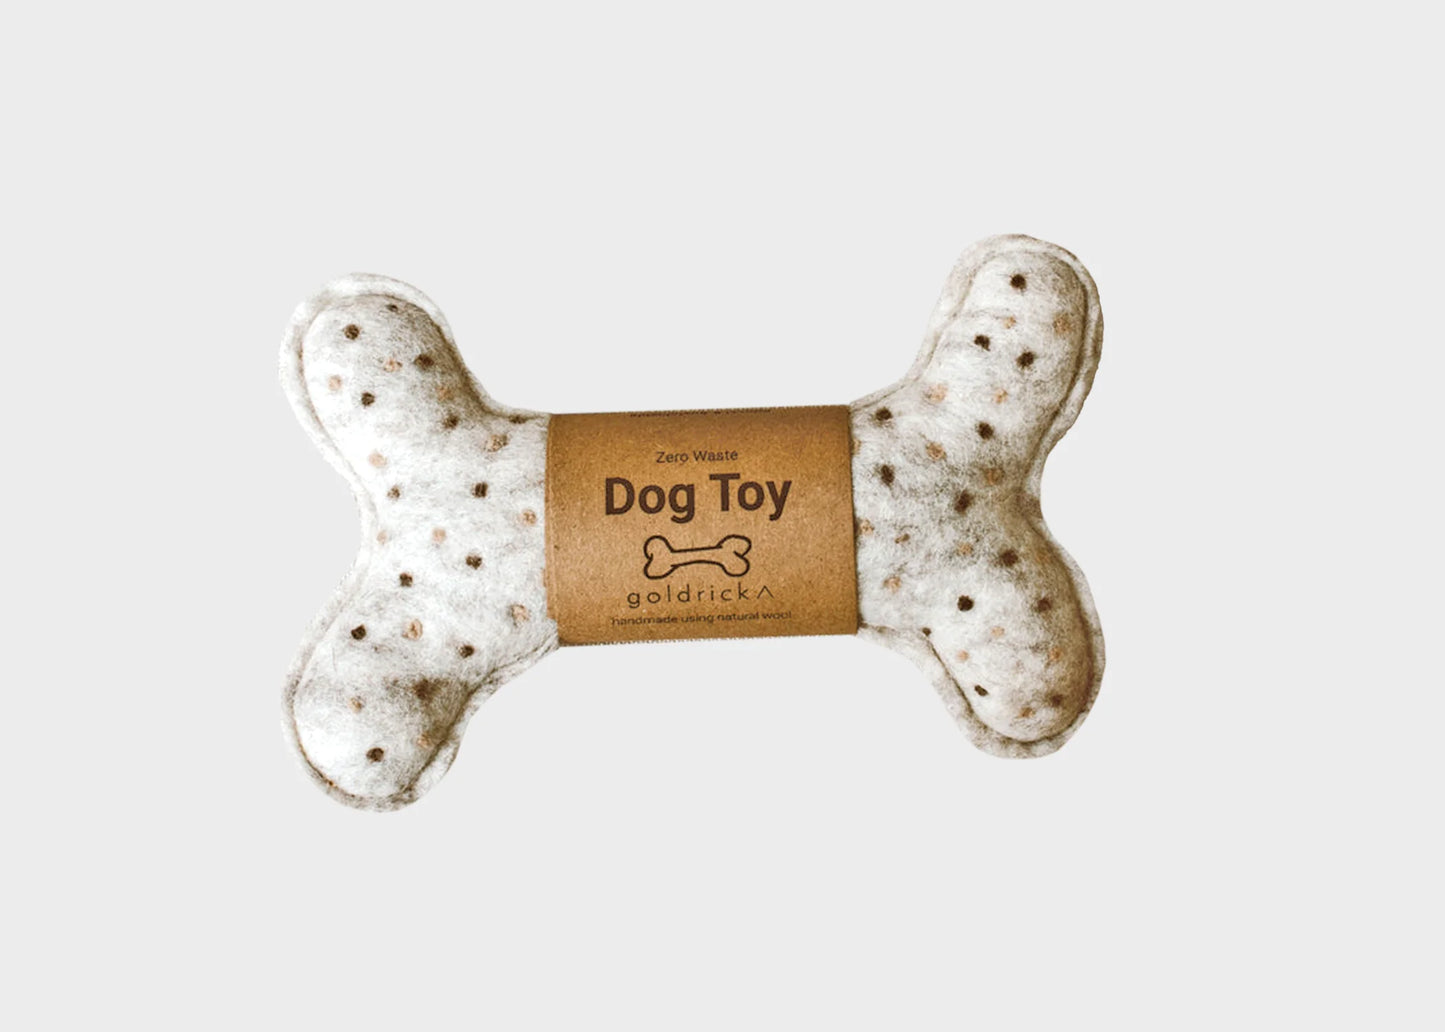 A Zero Waste Dog Toy by Goldrick in a bone shape made of natural wool with packaging.